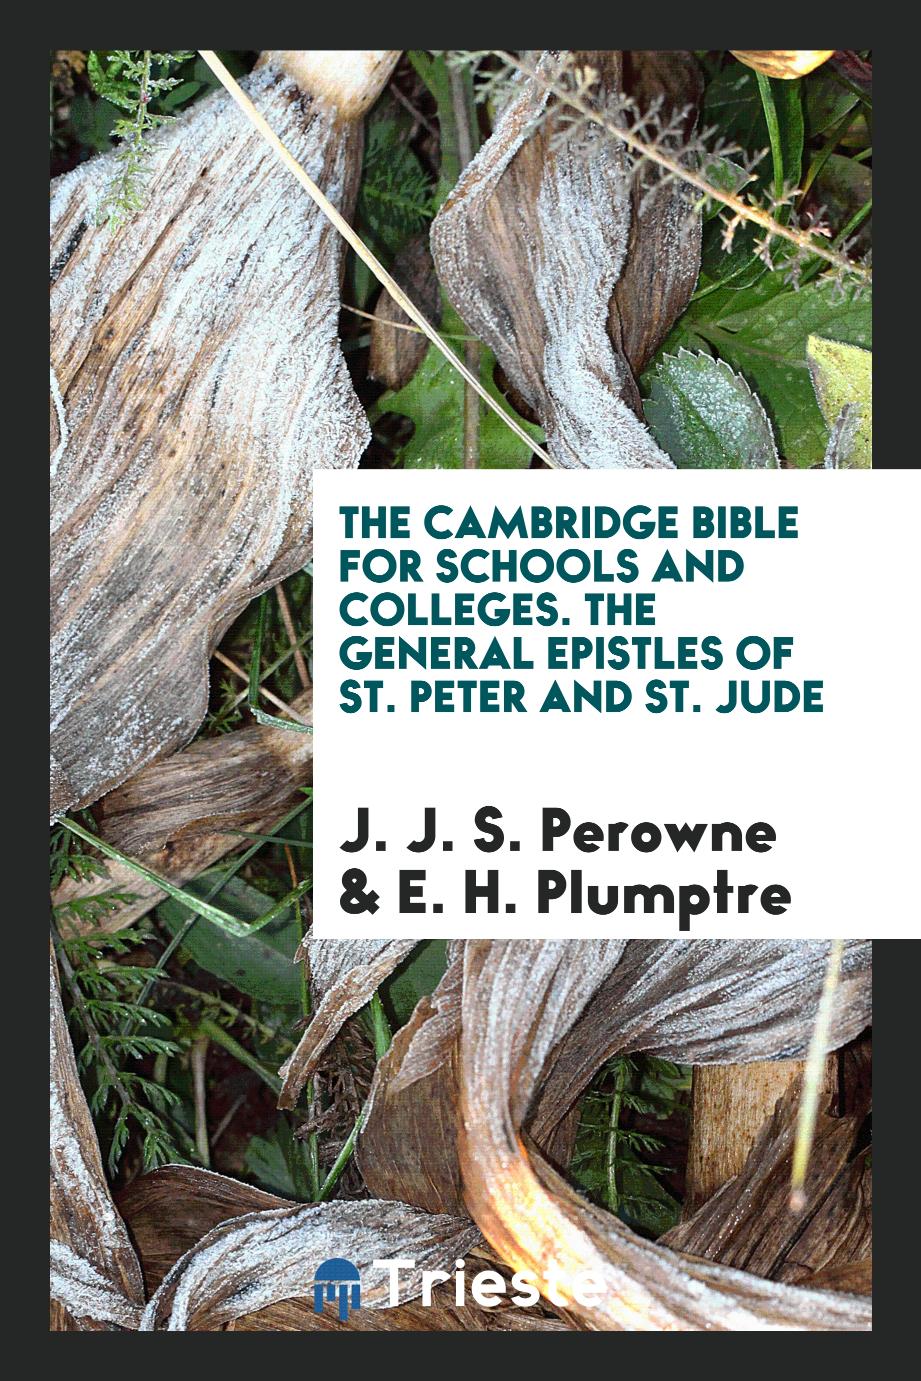 The Cambridge Bible for schools and colleges. The general epistles of St. Peter and St. Jude